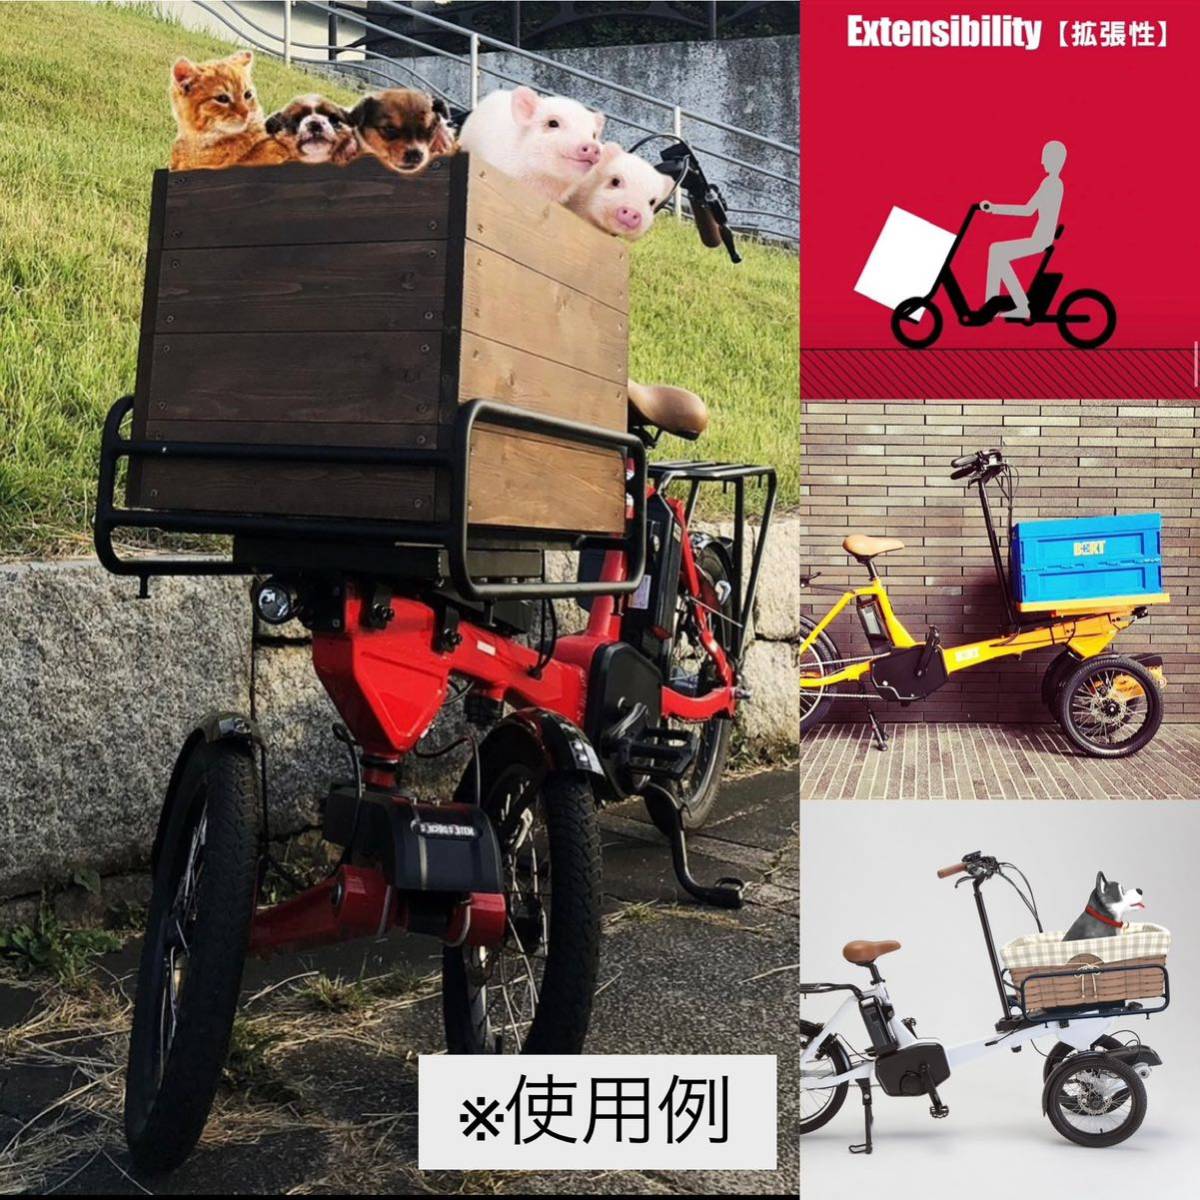  Toyota trike Carry adult tricycle bicycle stylish electromotive bicycle electric assist TOYODA TRIKE YAMAHA SHIMANO good-looking red red 